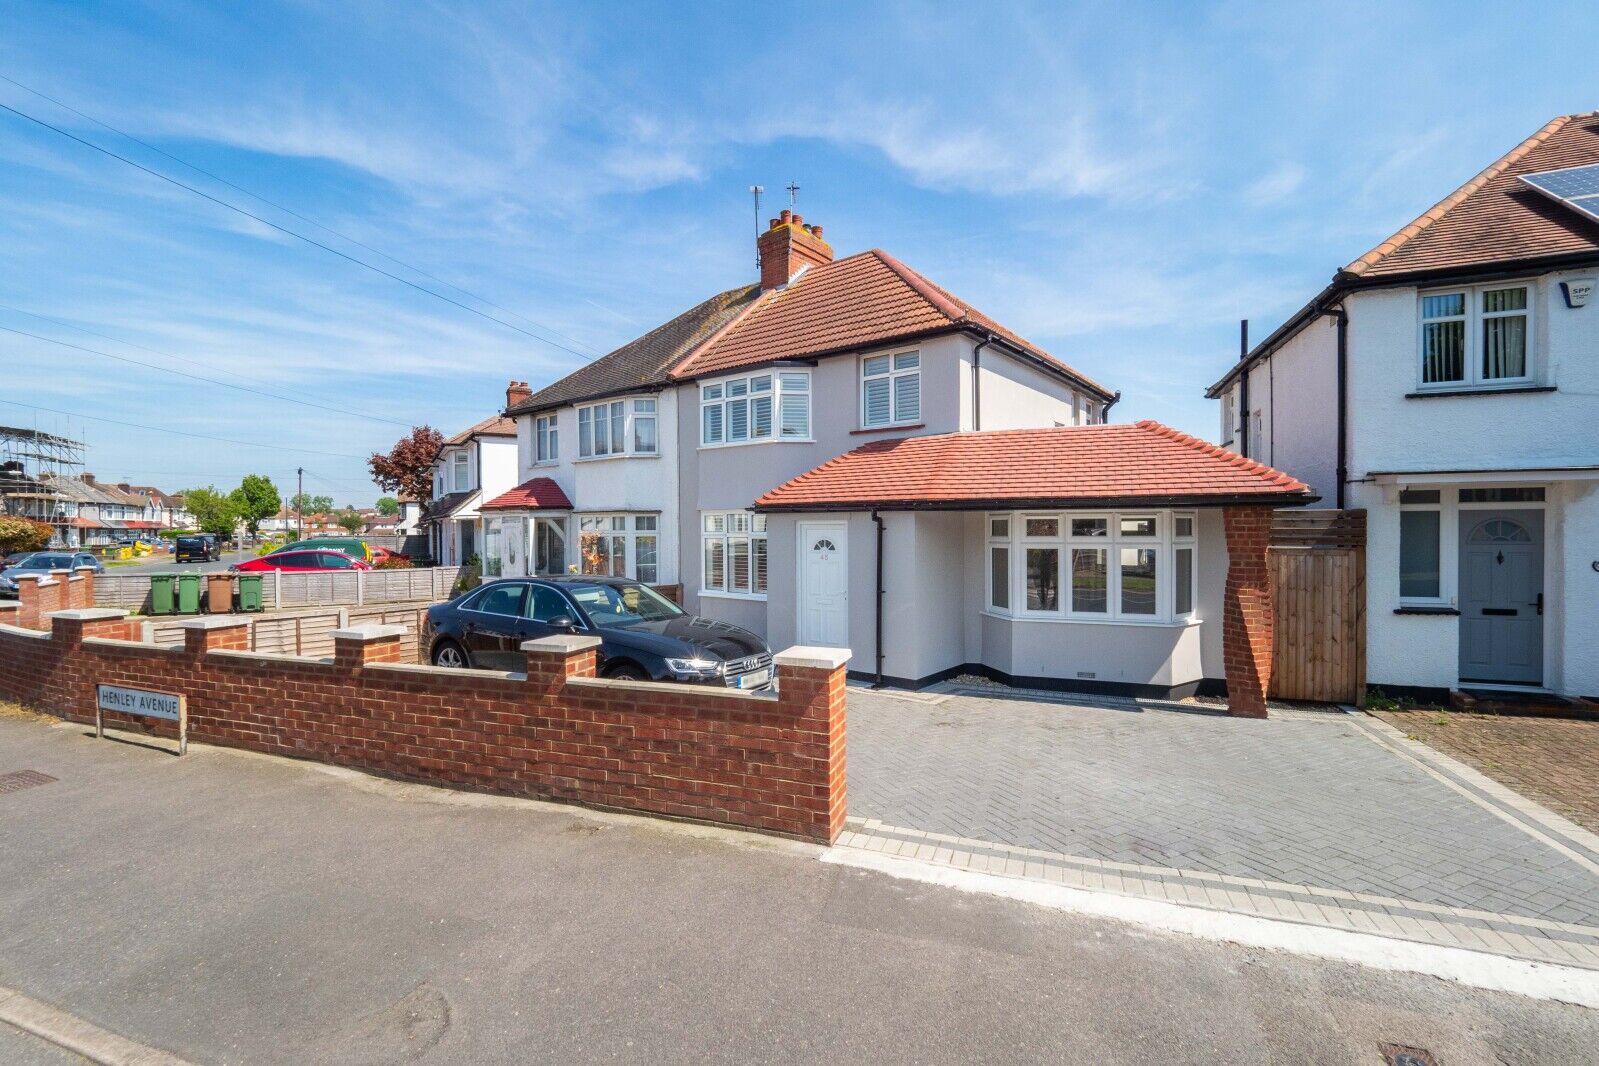 4 bedroom semi detached house for sale Henley Avenue, Cheam, SM3, main image